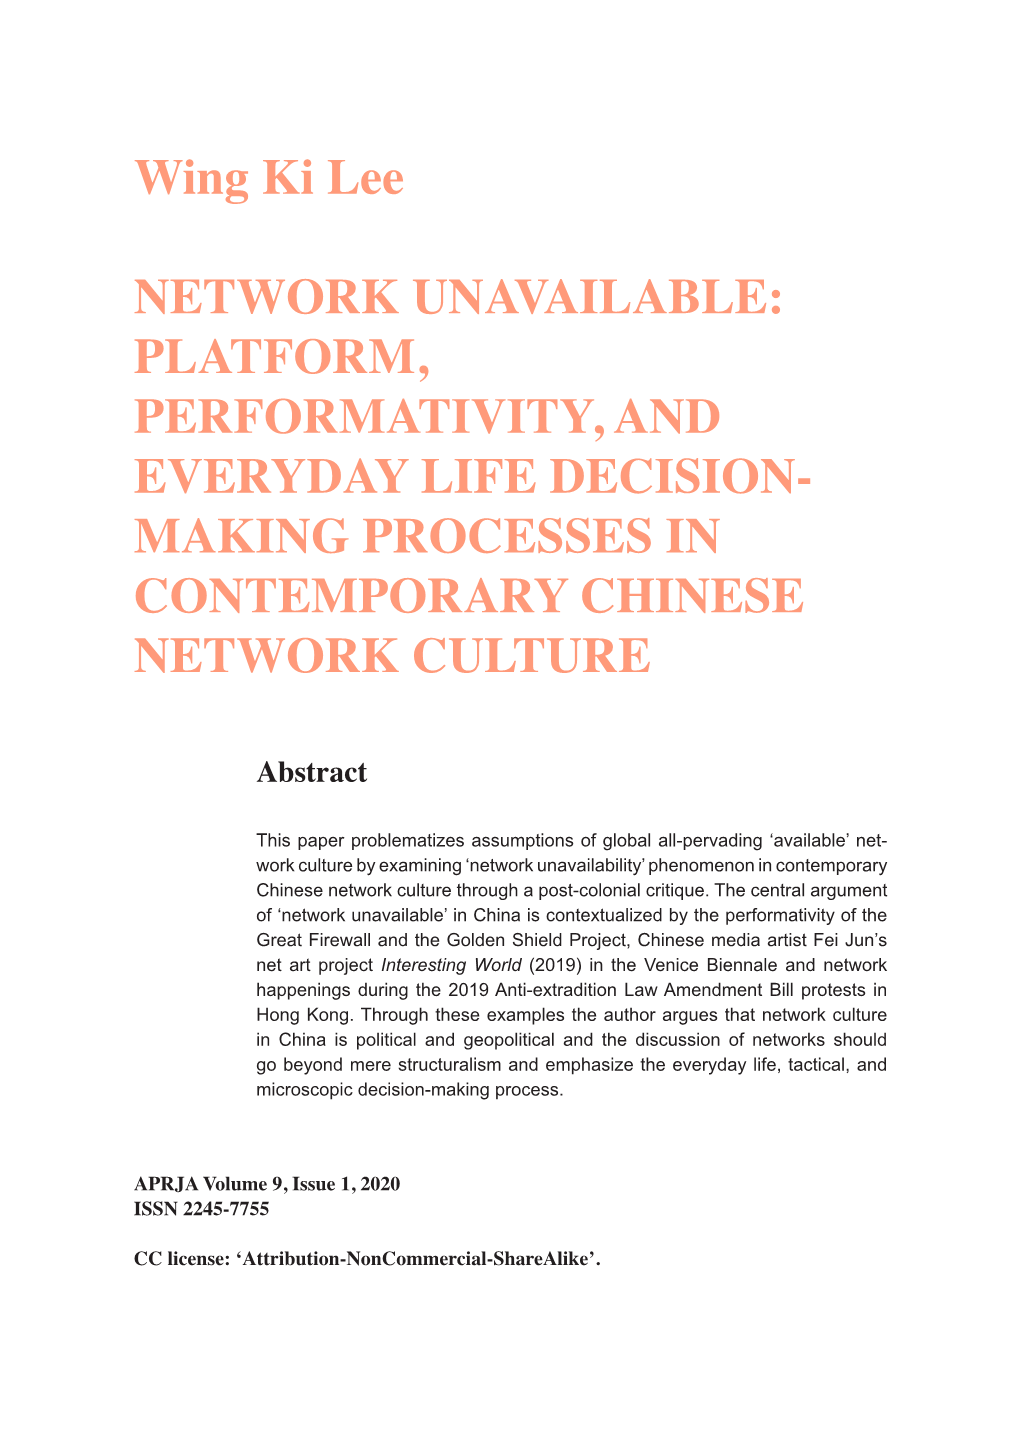 Platform, Performativity, and Everyday Life Decision- Making Processes in Contemporary Chinese Network Culture